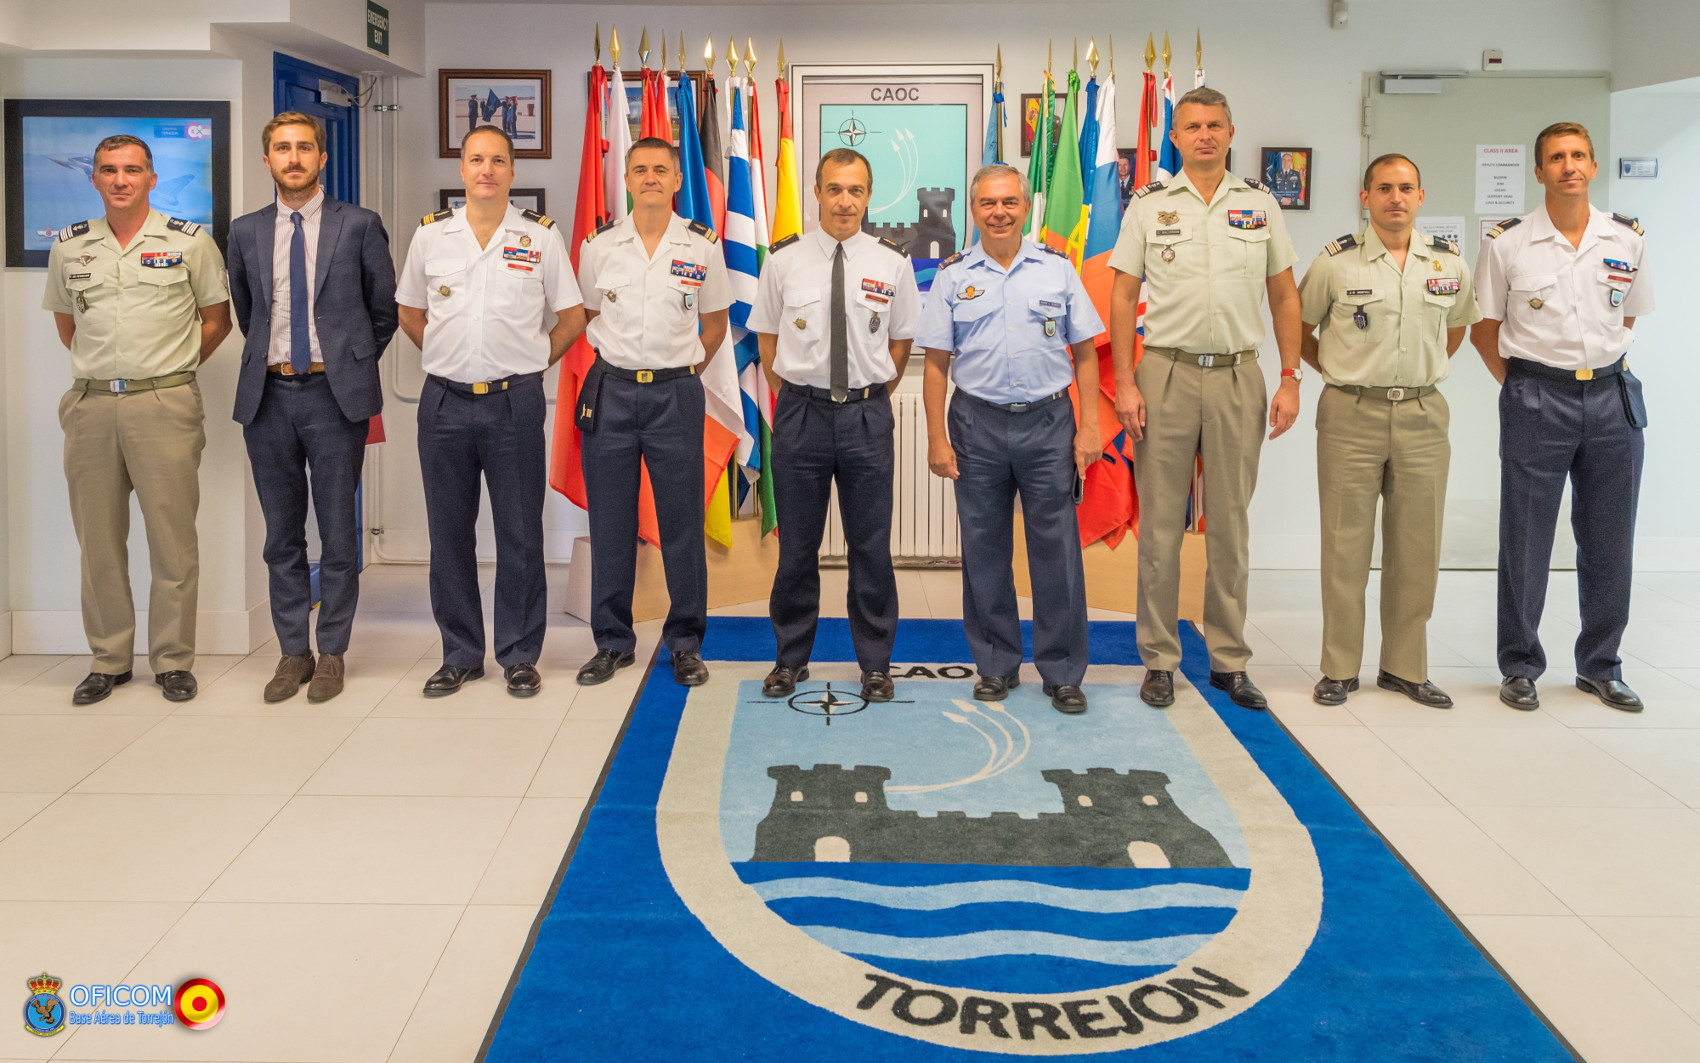 The Chief of the Euro Atlantic Division from the French Defence Staff visits the CAOC Torrejón